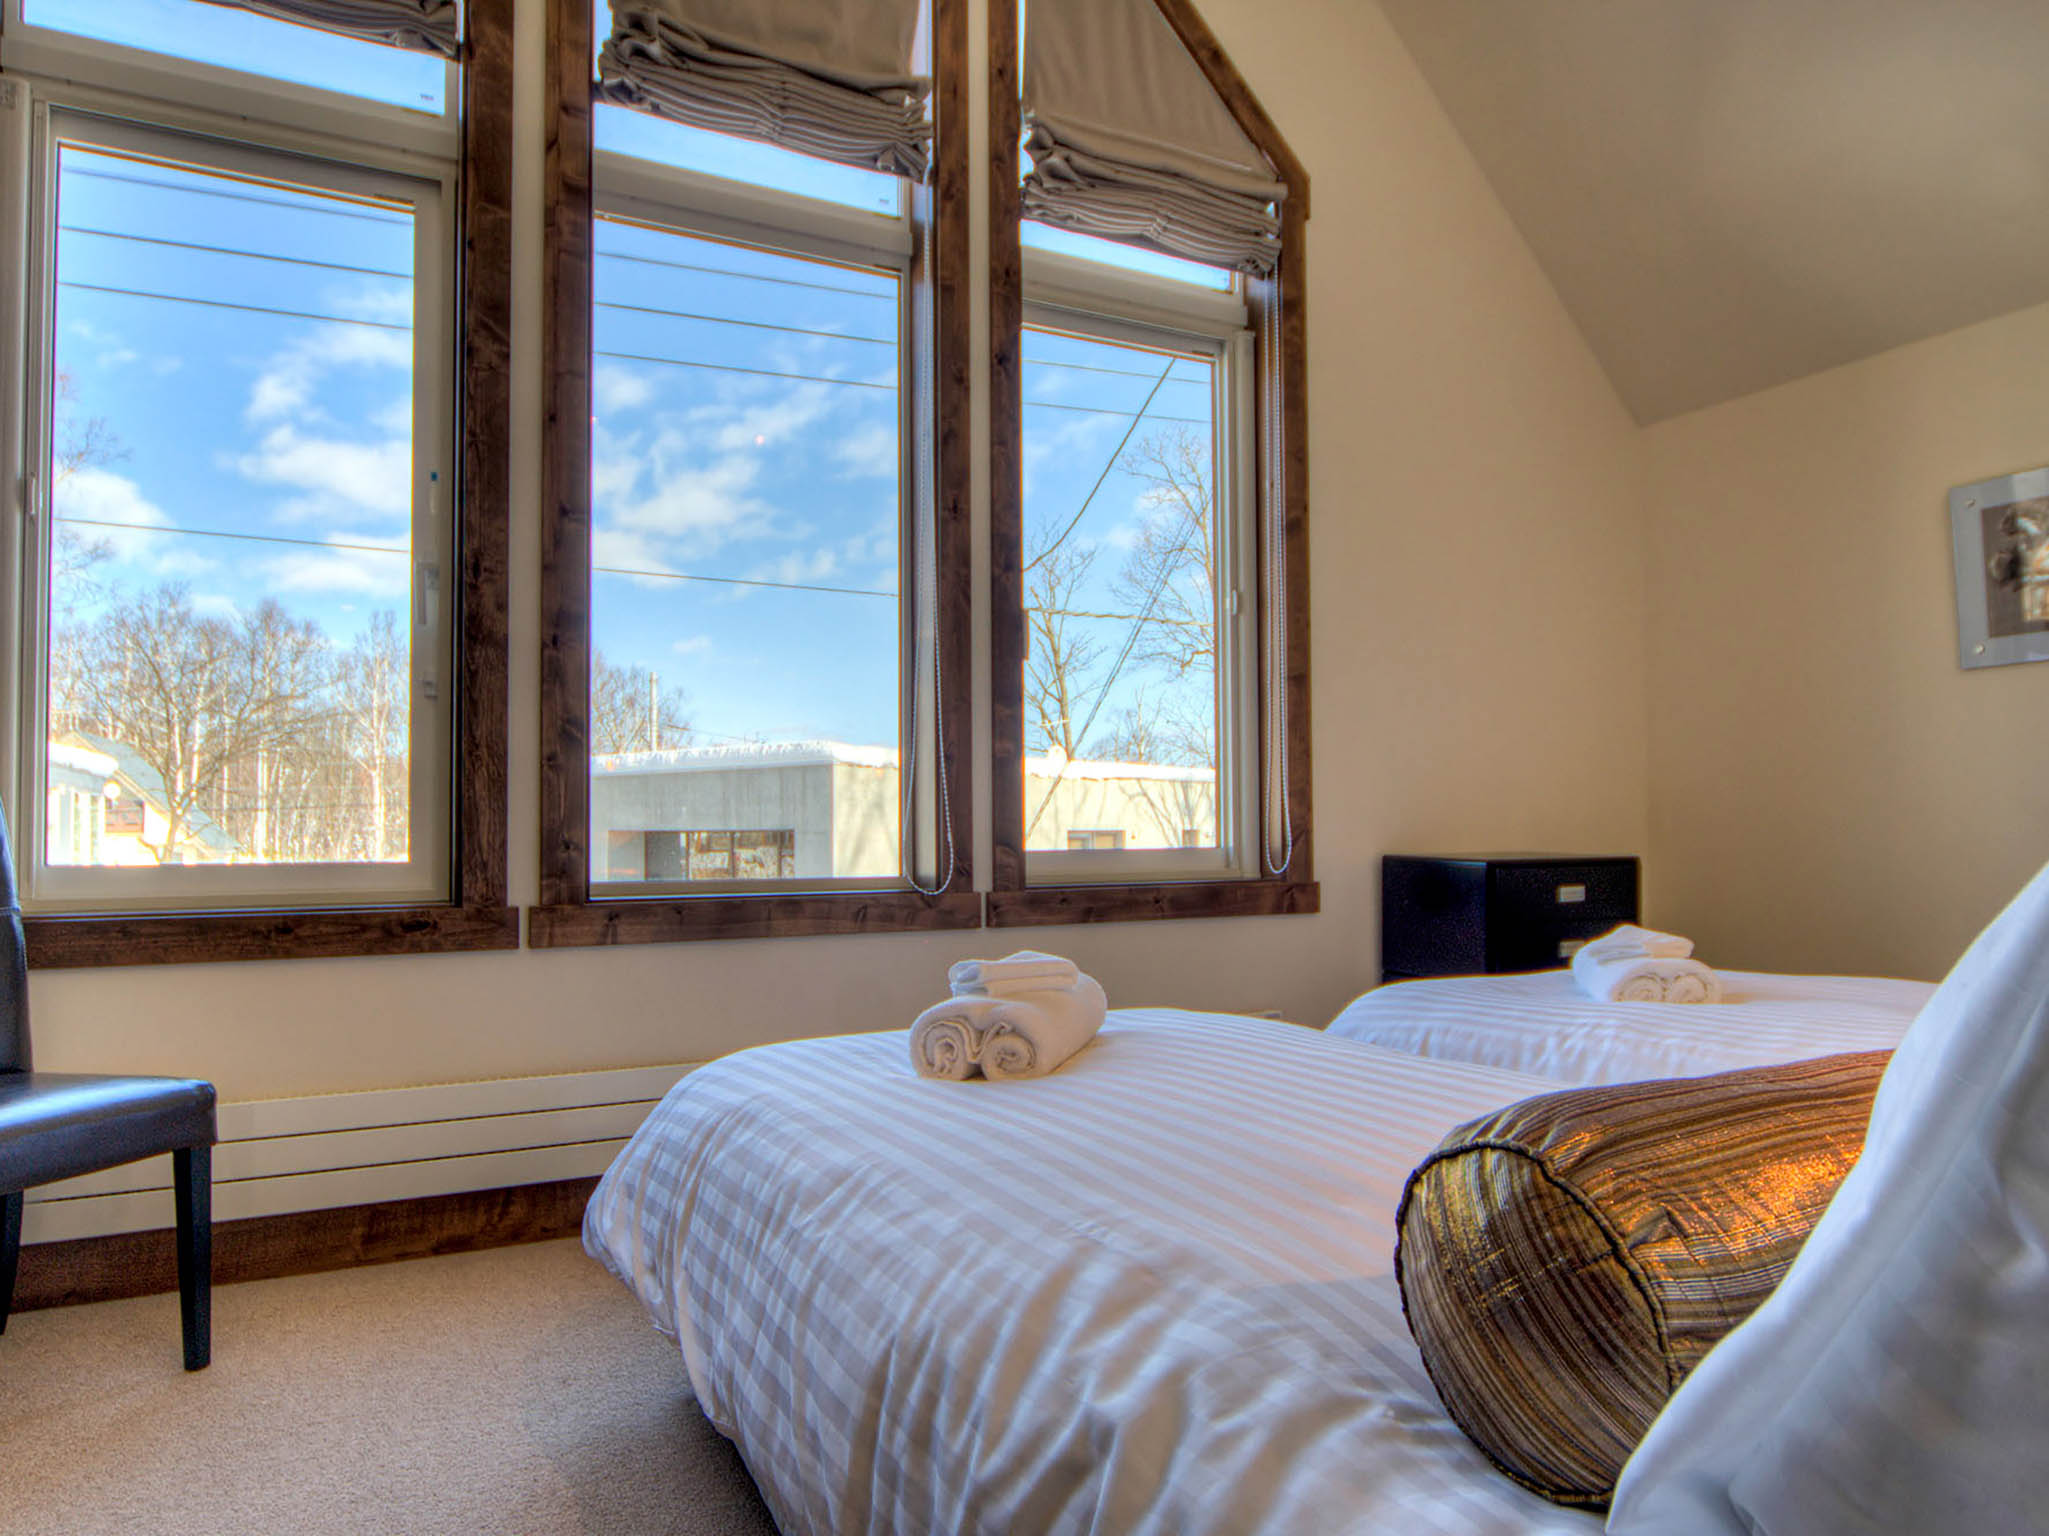 Gouka Chalet - Guest bedroom with beautiful view